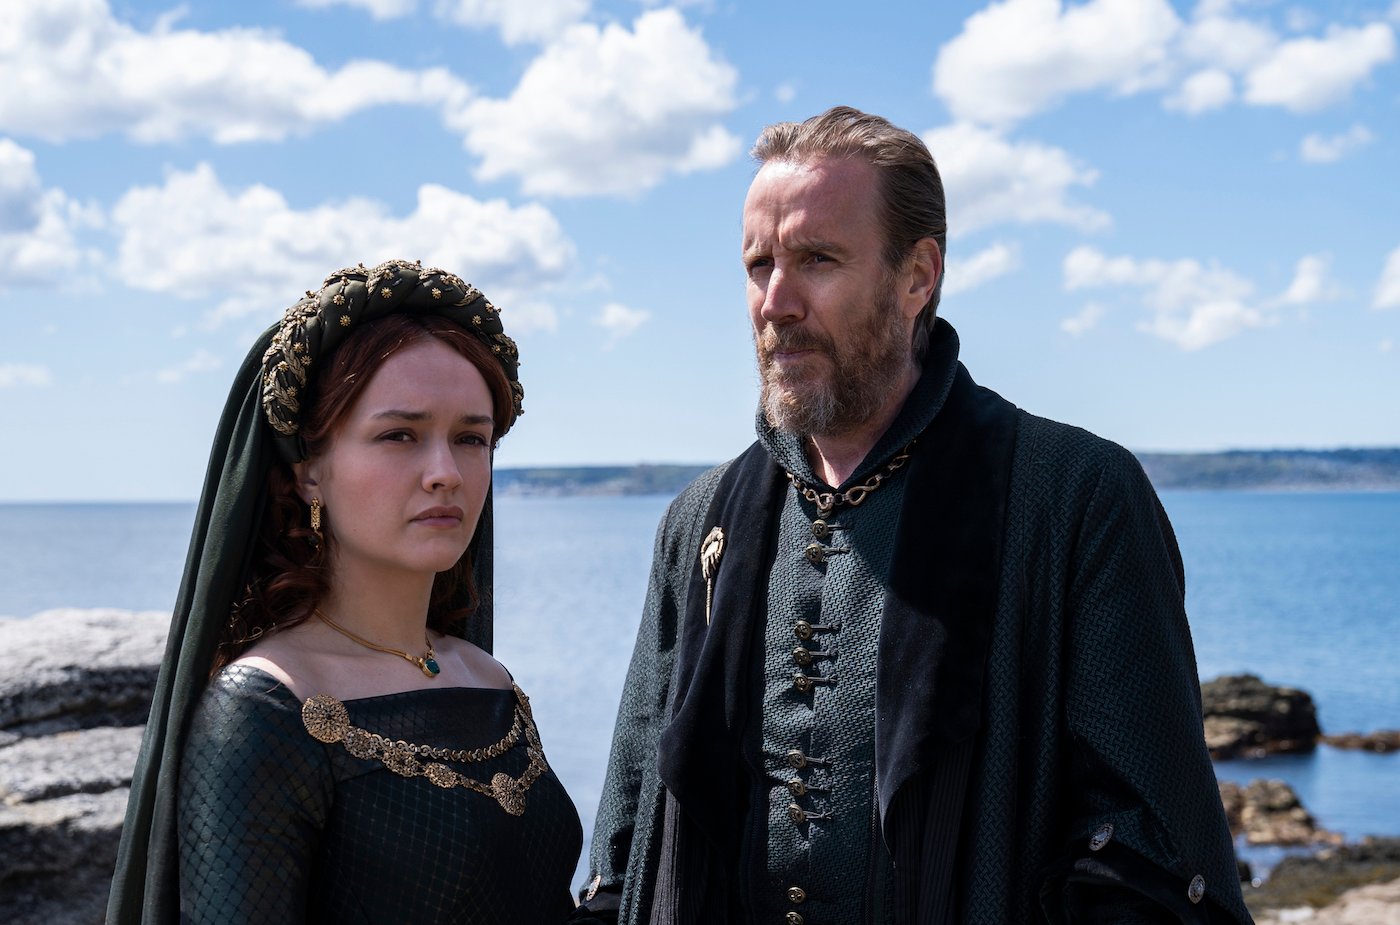 Olivia Cooke and Rhys Ifans in a production still of the upcoming season of 'House of the Dragon'